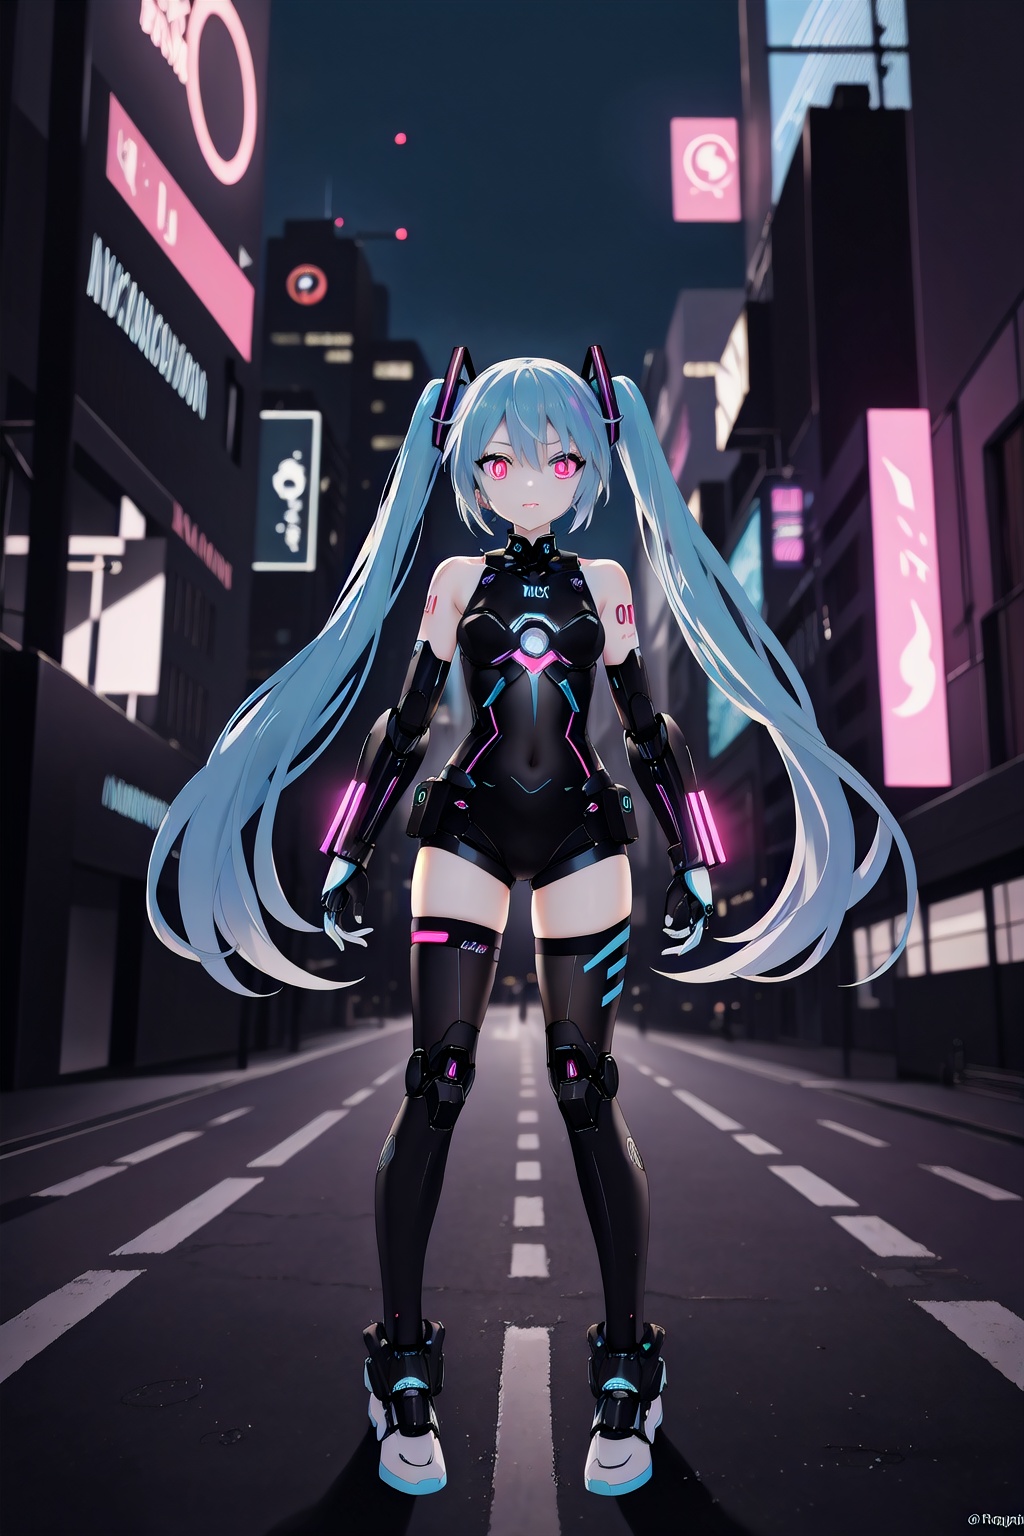 futuristic-style Hatsune Miku, cyberpunk elements, neon lights, holographic accessories, digital environment, advanced technology, robotic aesthetics, anime character, colorful hair, dynamic pose, urban backdrop, glowing eyes, virtual idol, high-tech fashion, immersive atmosphere, vibrant colors, future city skyline, cutting-edge design, stylish outfit, hologram effects, digital art, sci-fi elements, energetic vibe, youth culture, modern anime style, holographic display, illuminated cityscape, night scene, advanced gadgets, cool attitude, , masterpiece, best quality